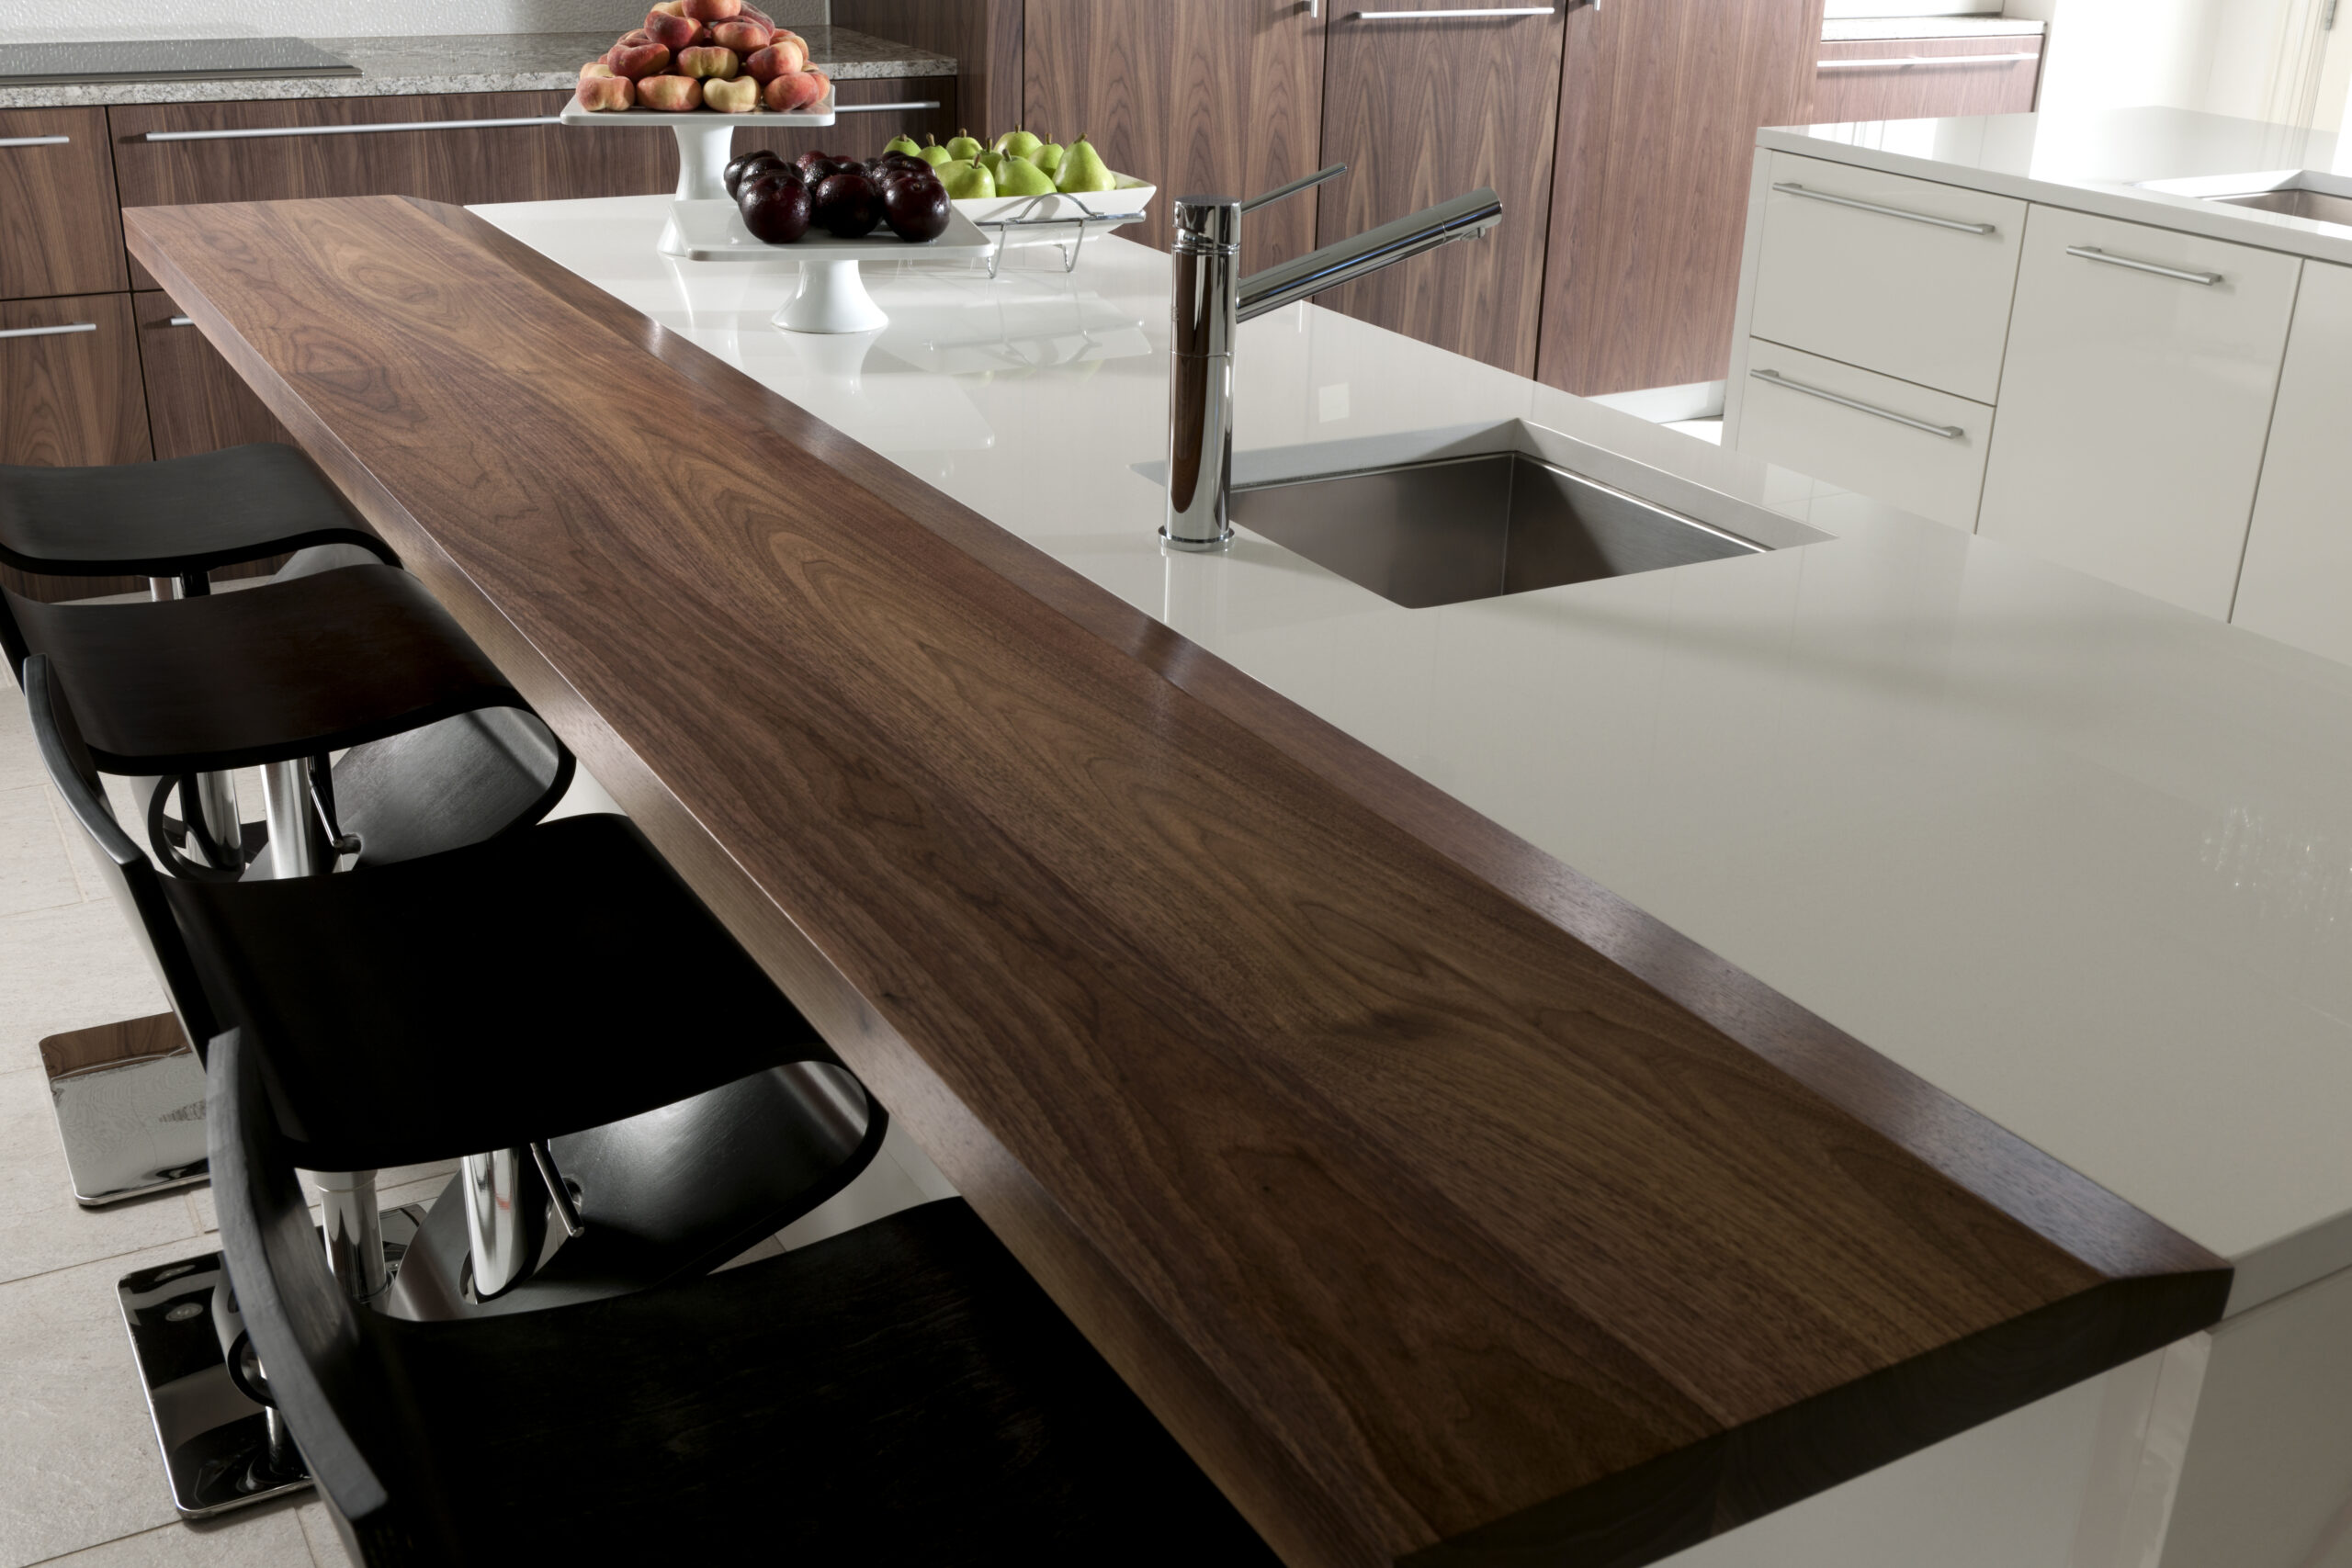 Buy wood countertops at French Creek Designs Kitchen & Bath Store in Casper, Wyoming